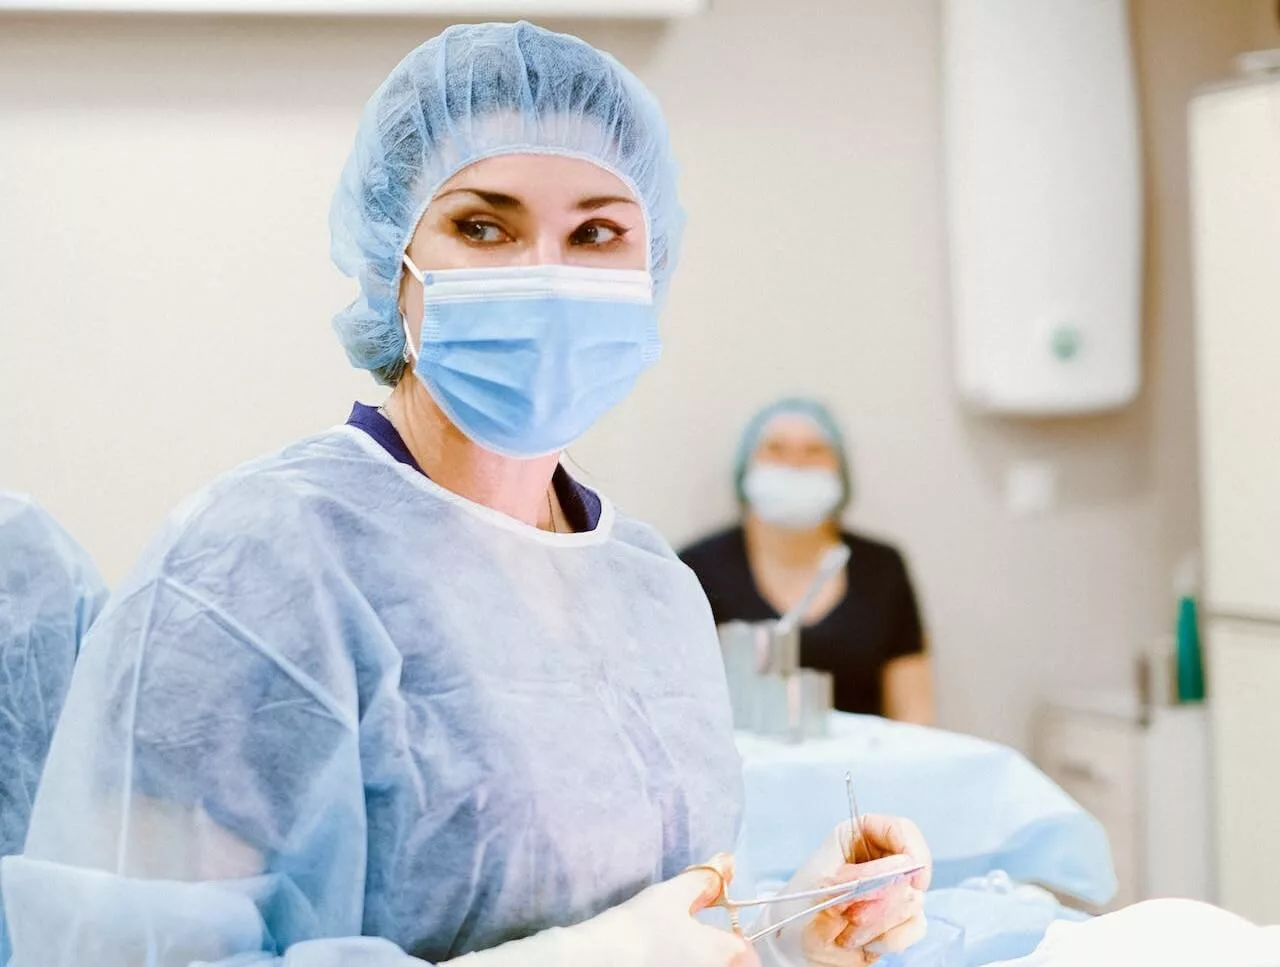 How To Improve Block Utilization For Surgical Practices